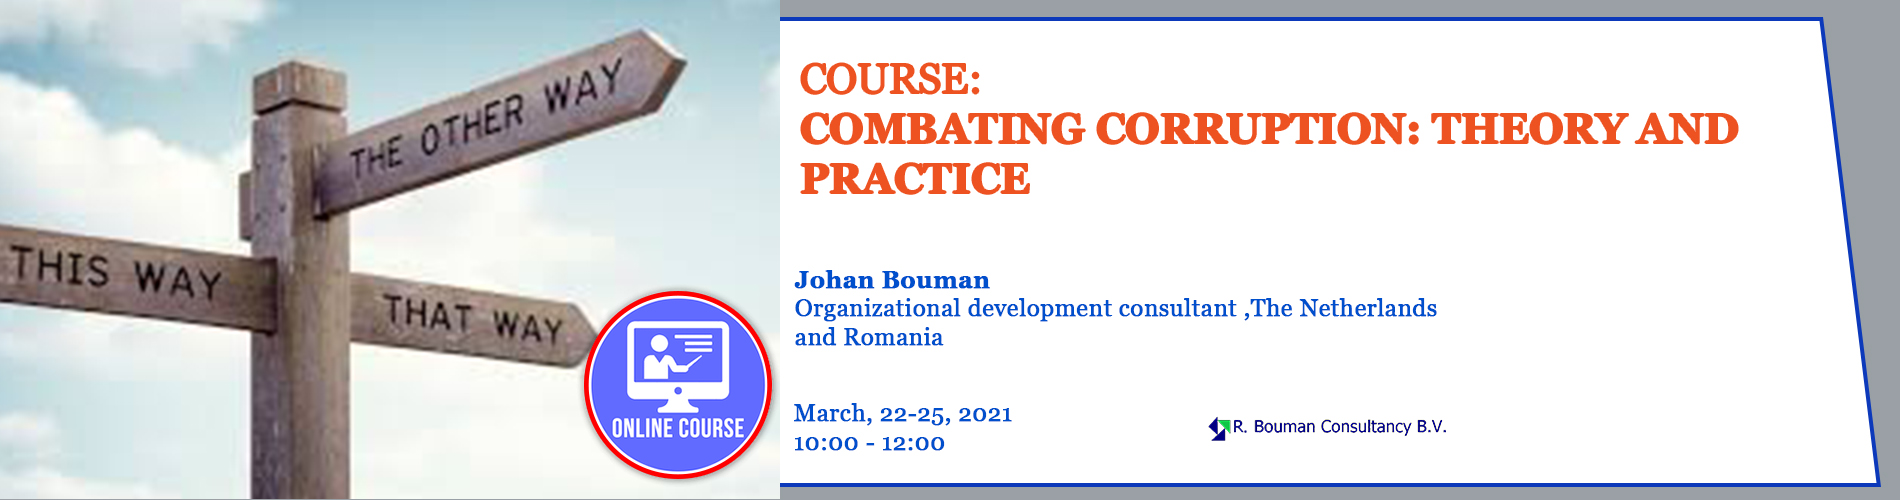 2021.03.22-2021.03.25-Combating corruption,theory and practice